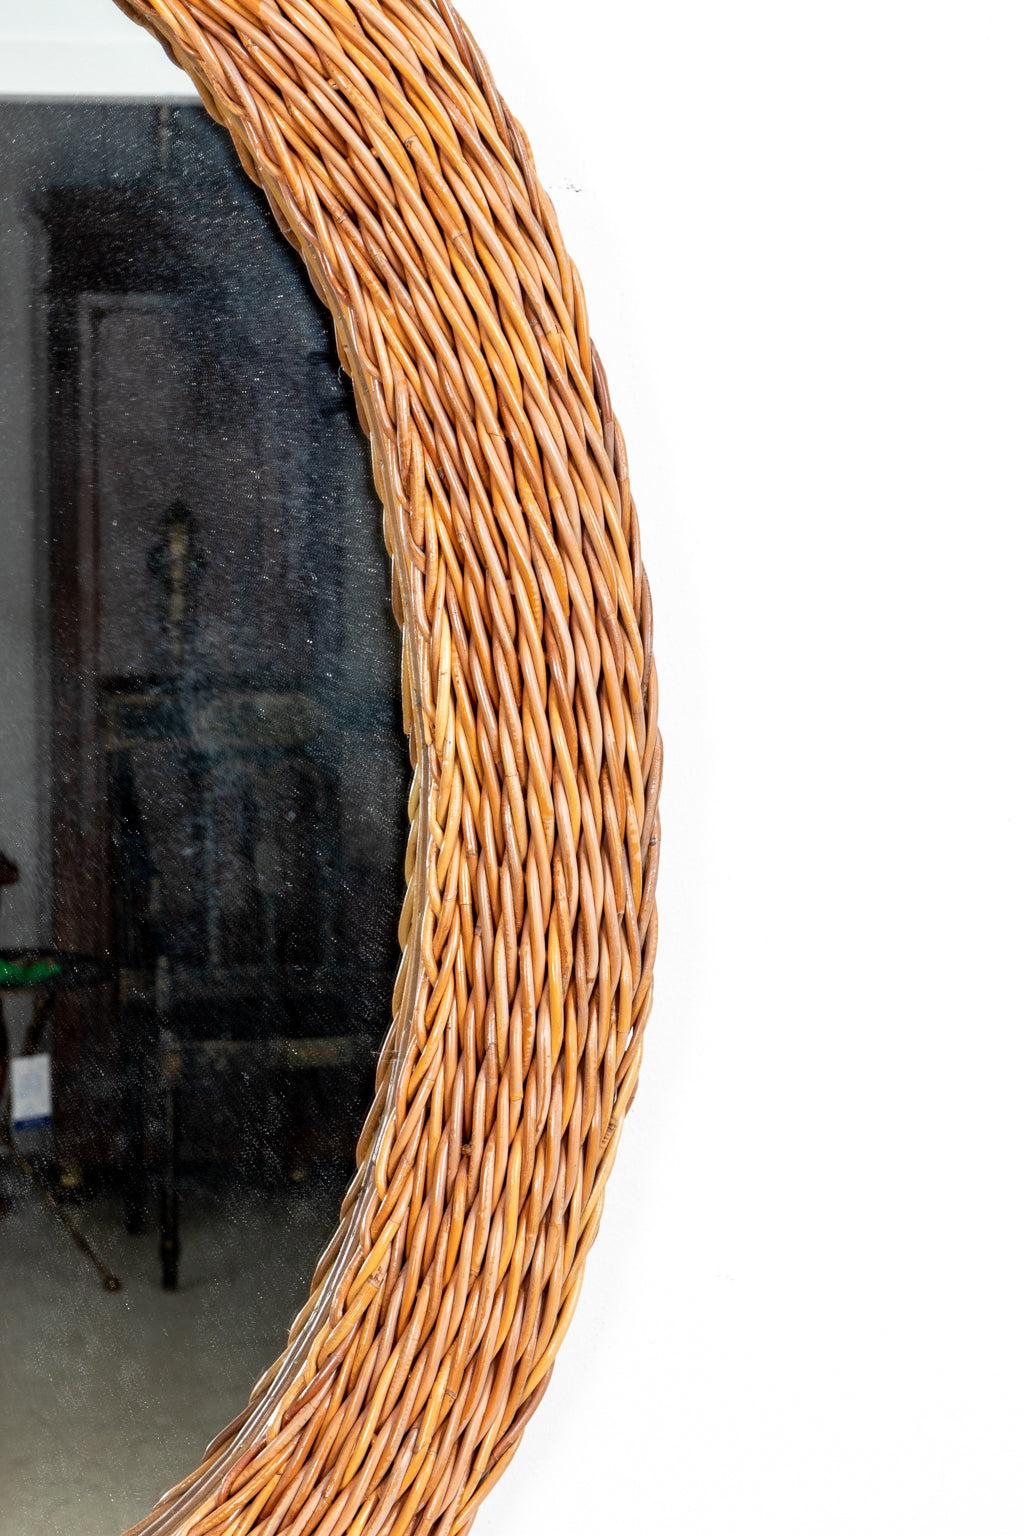 Circa 1970-1990s large oval shaped woven wicker mirror. The mirror can be wired to be hung vertically or horizontally. Origin unknown. Please note of wear consistent with age.